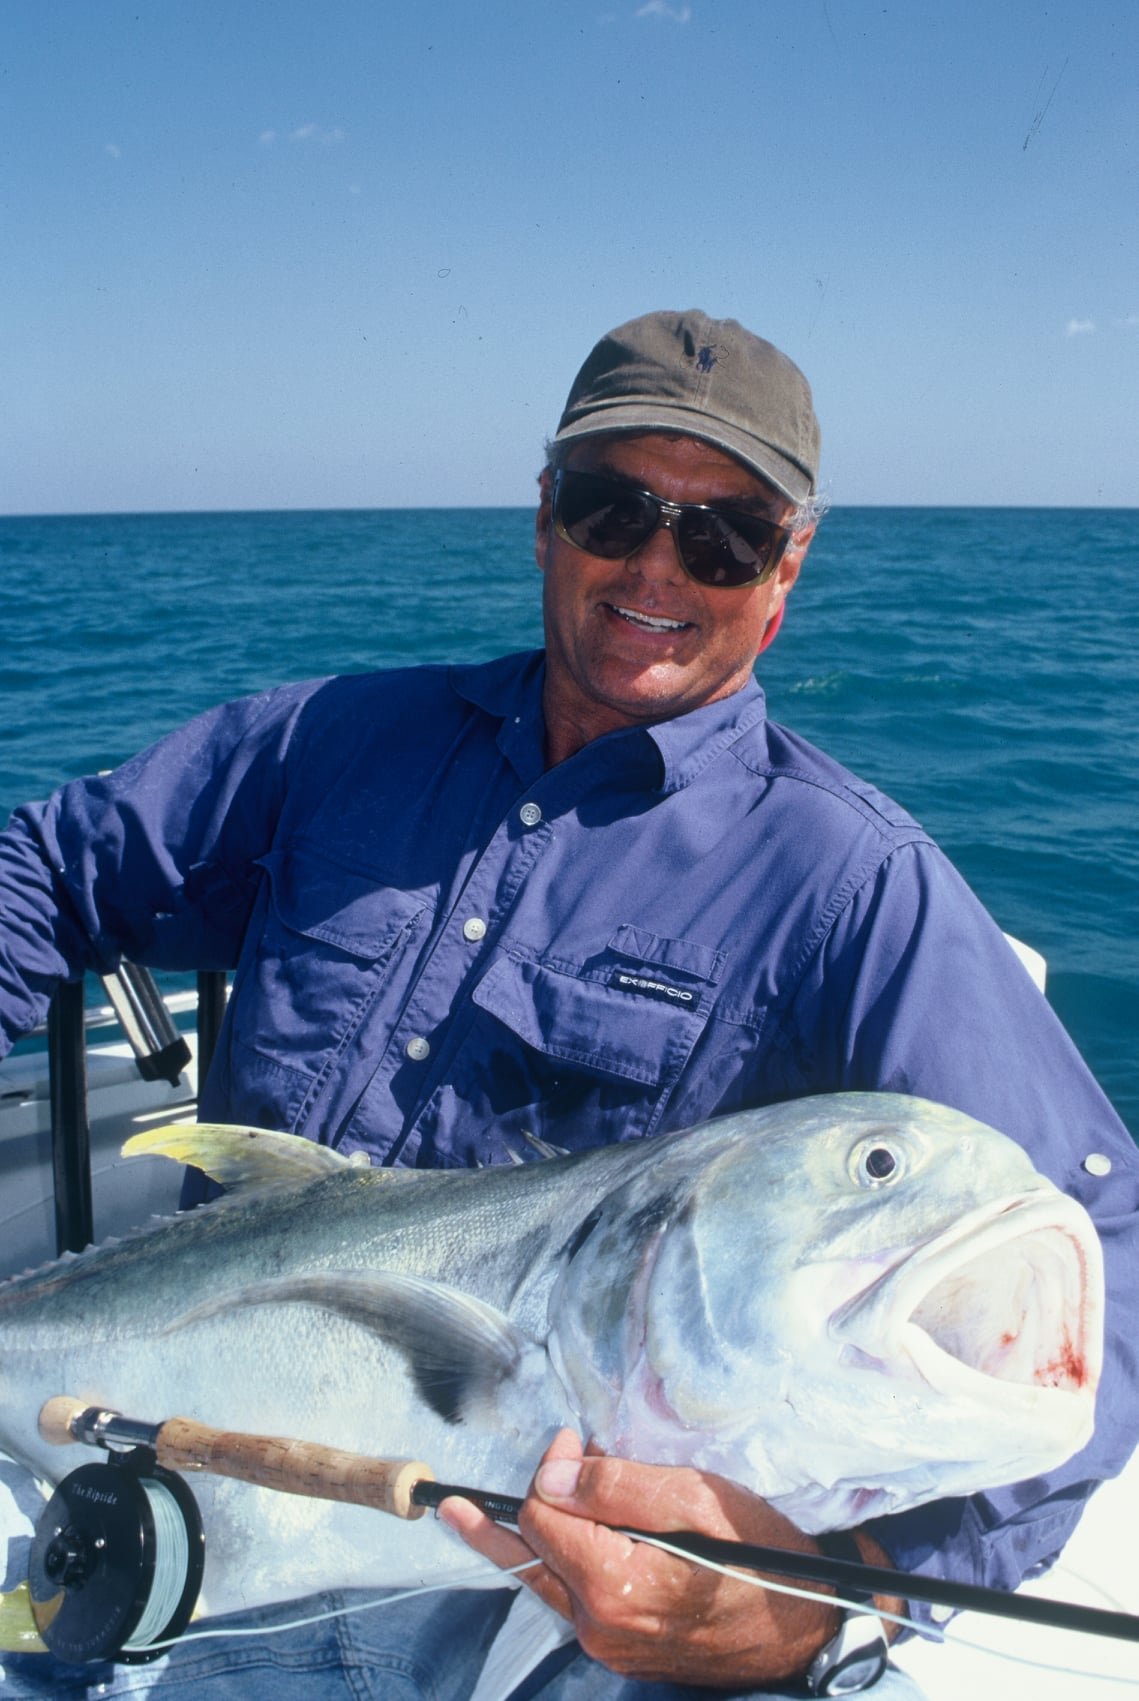 Beach Fishing Stories With Fishing Author Steve Kantner (Podcast)